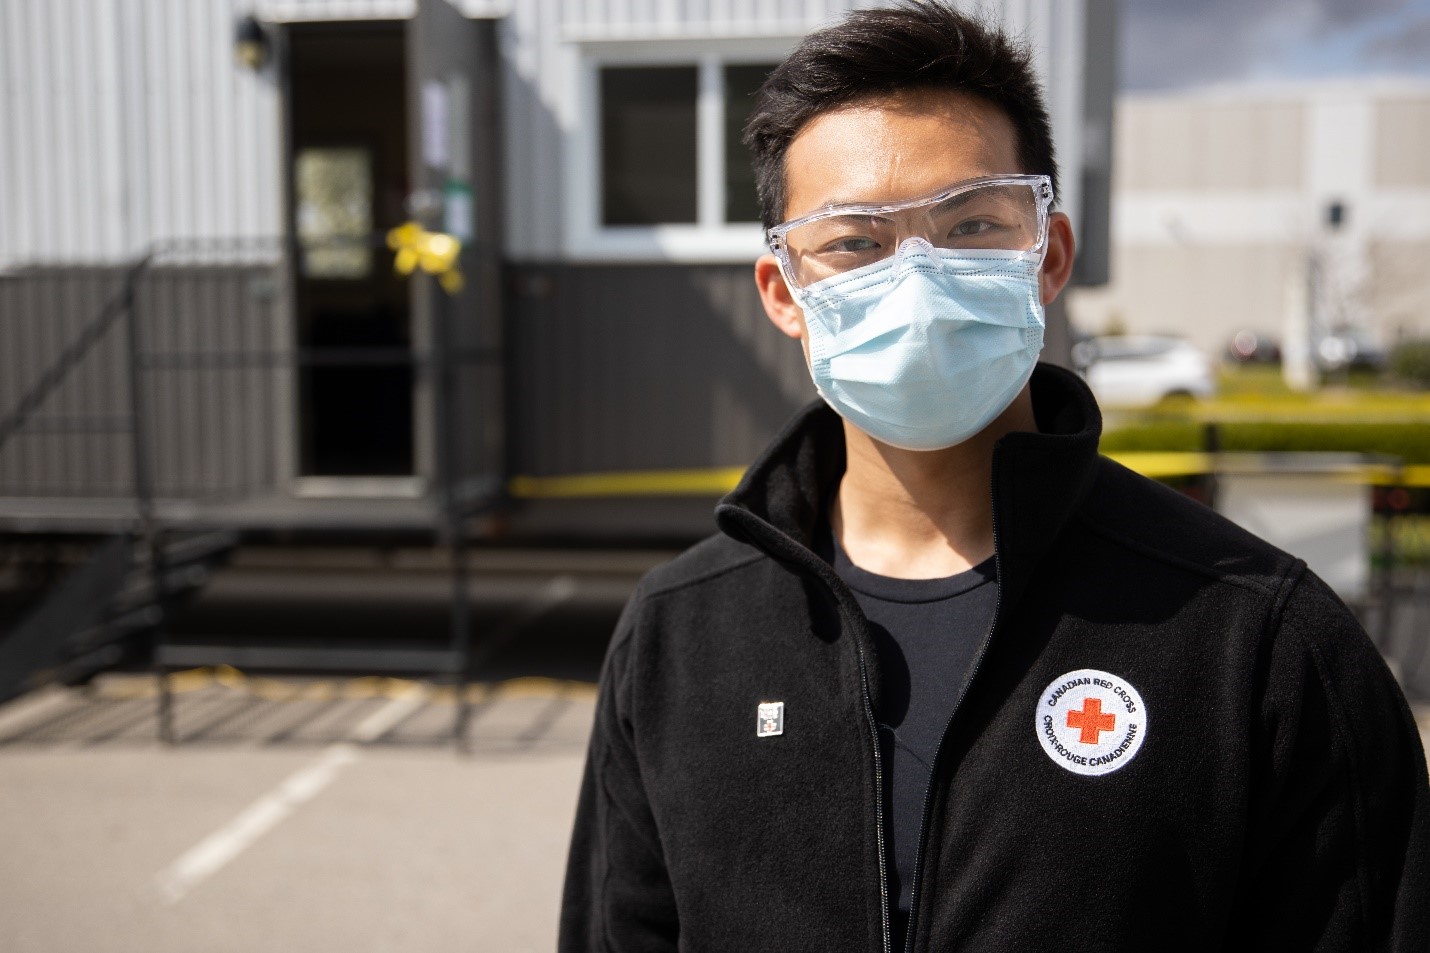 Red Cross worker outside wearing medical mask and protective eyewear